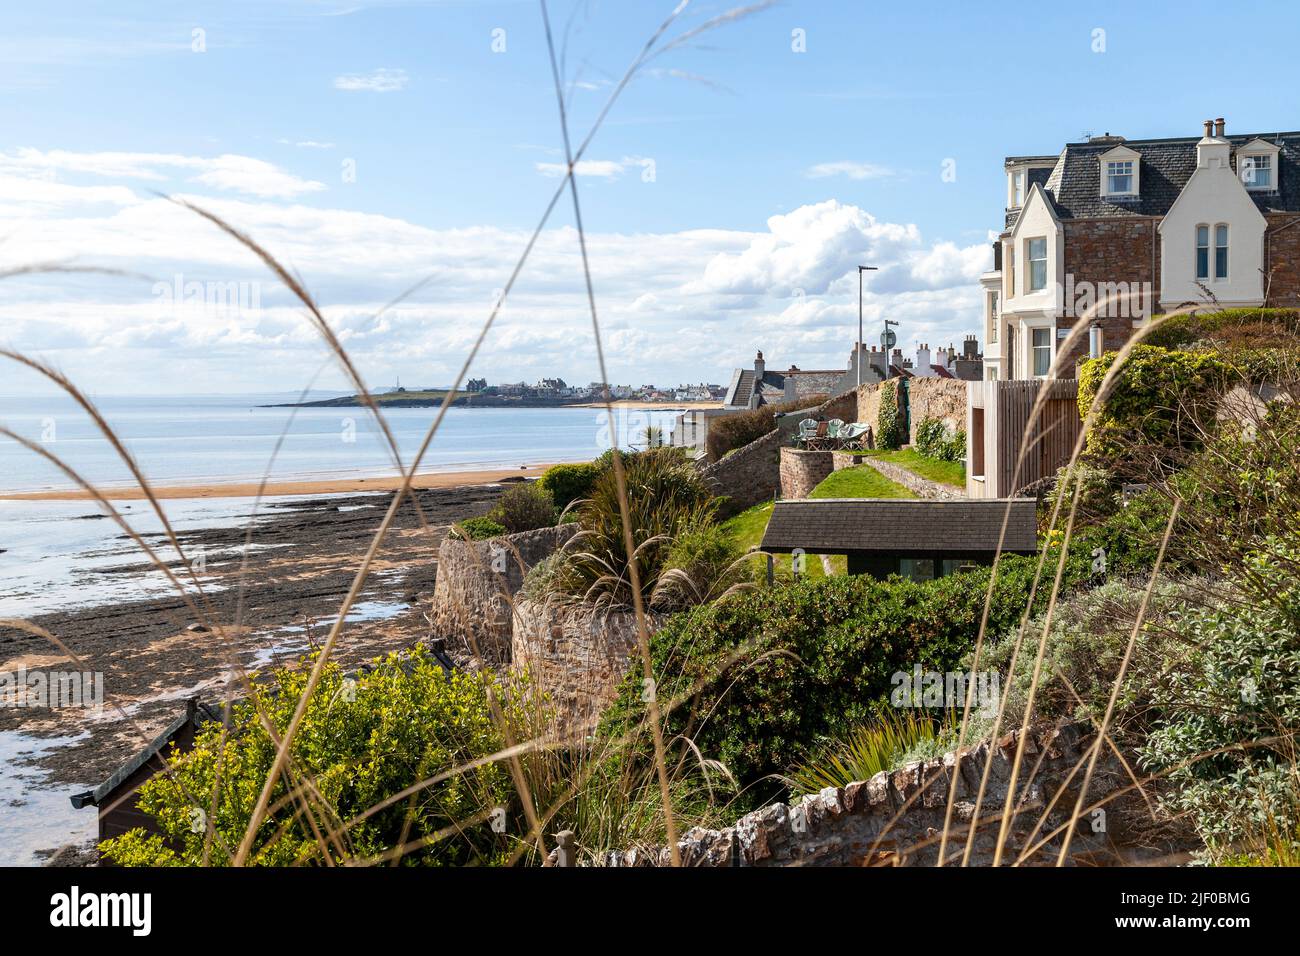 The picturesque seaside village of Elie in Fife, Scotland Stock Photo